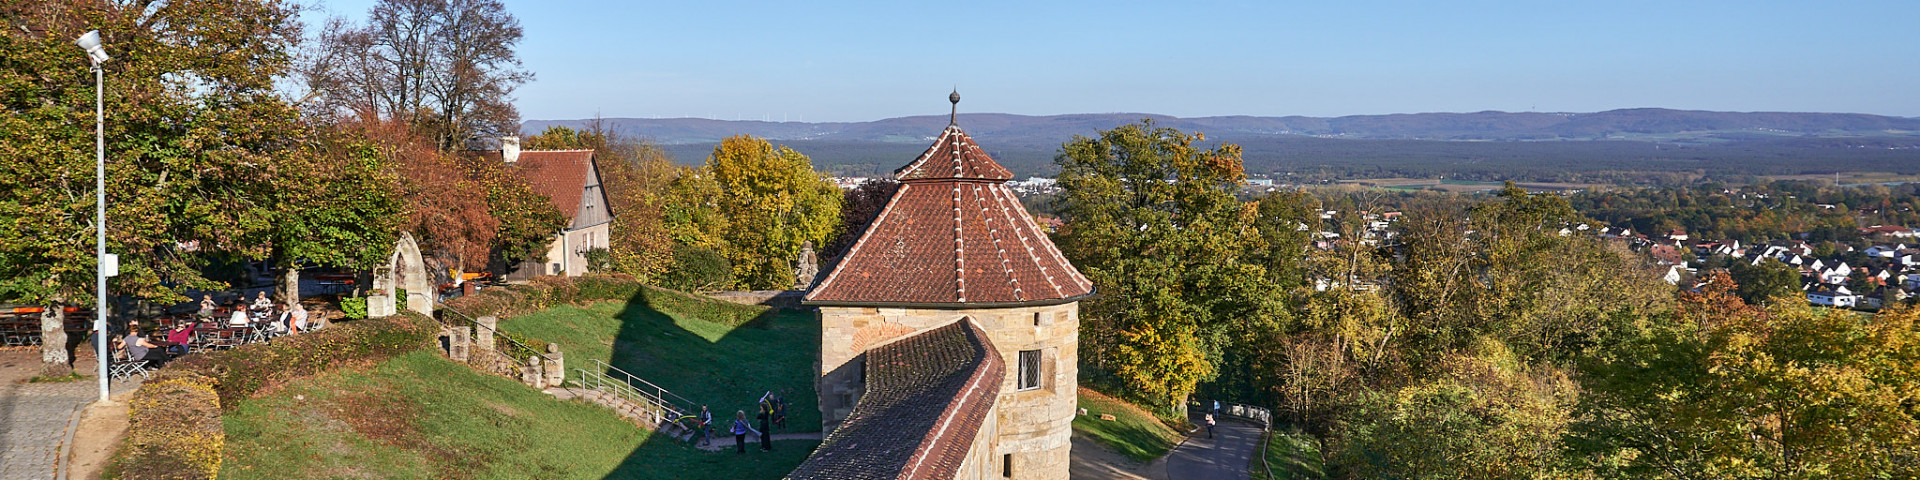 panoramic view from Altenburg castle near Bamberg